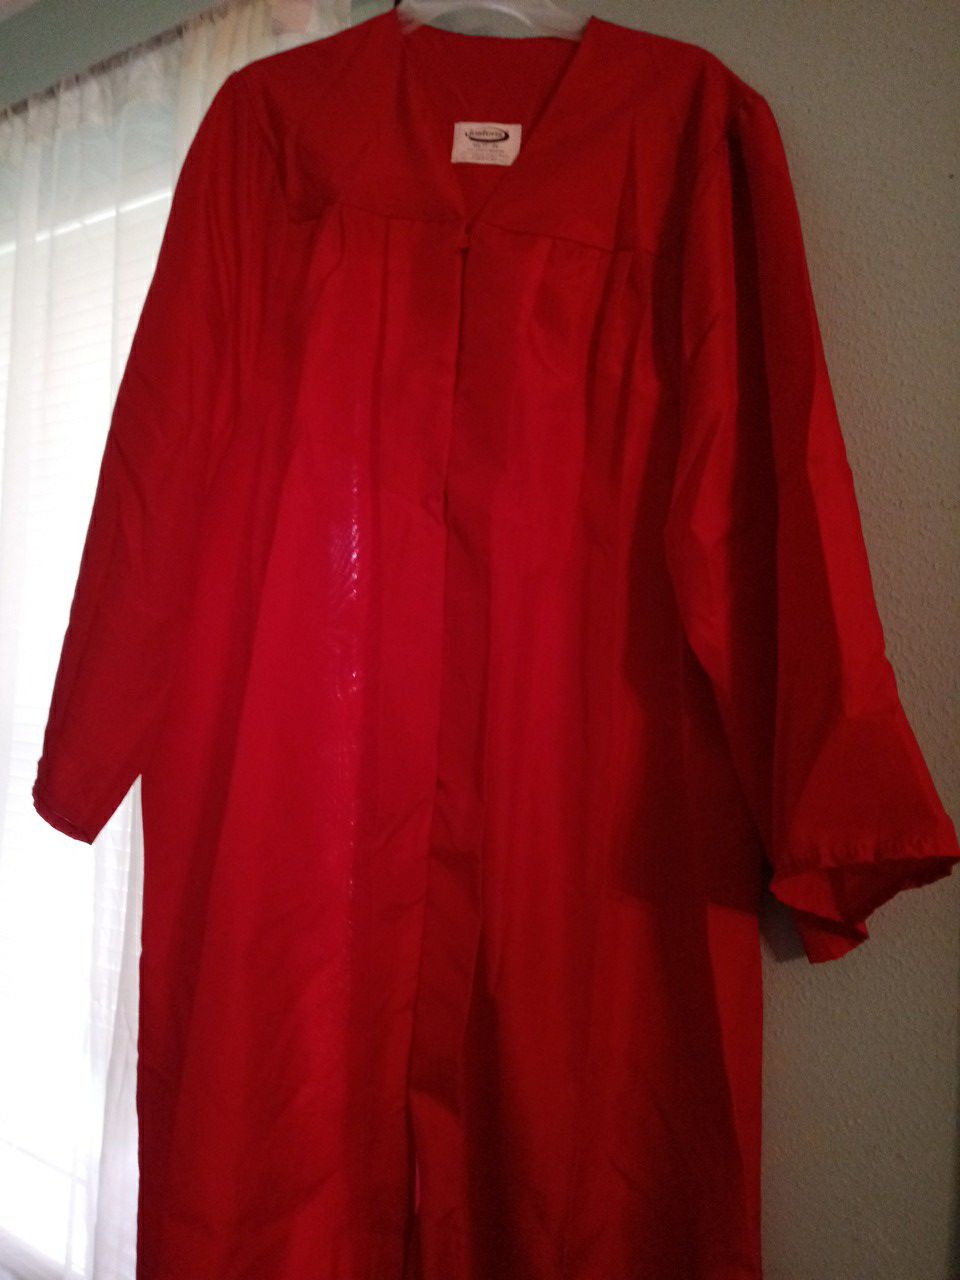 Gowns for graduations